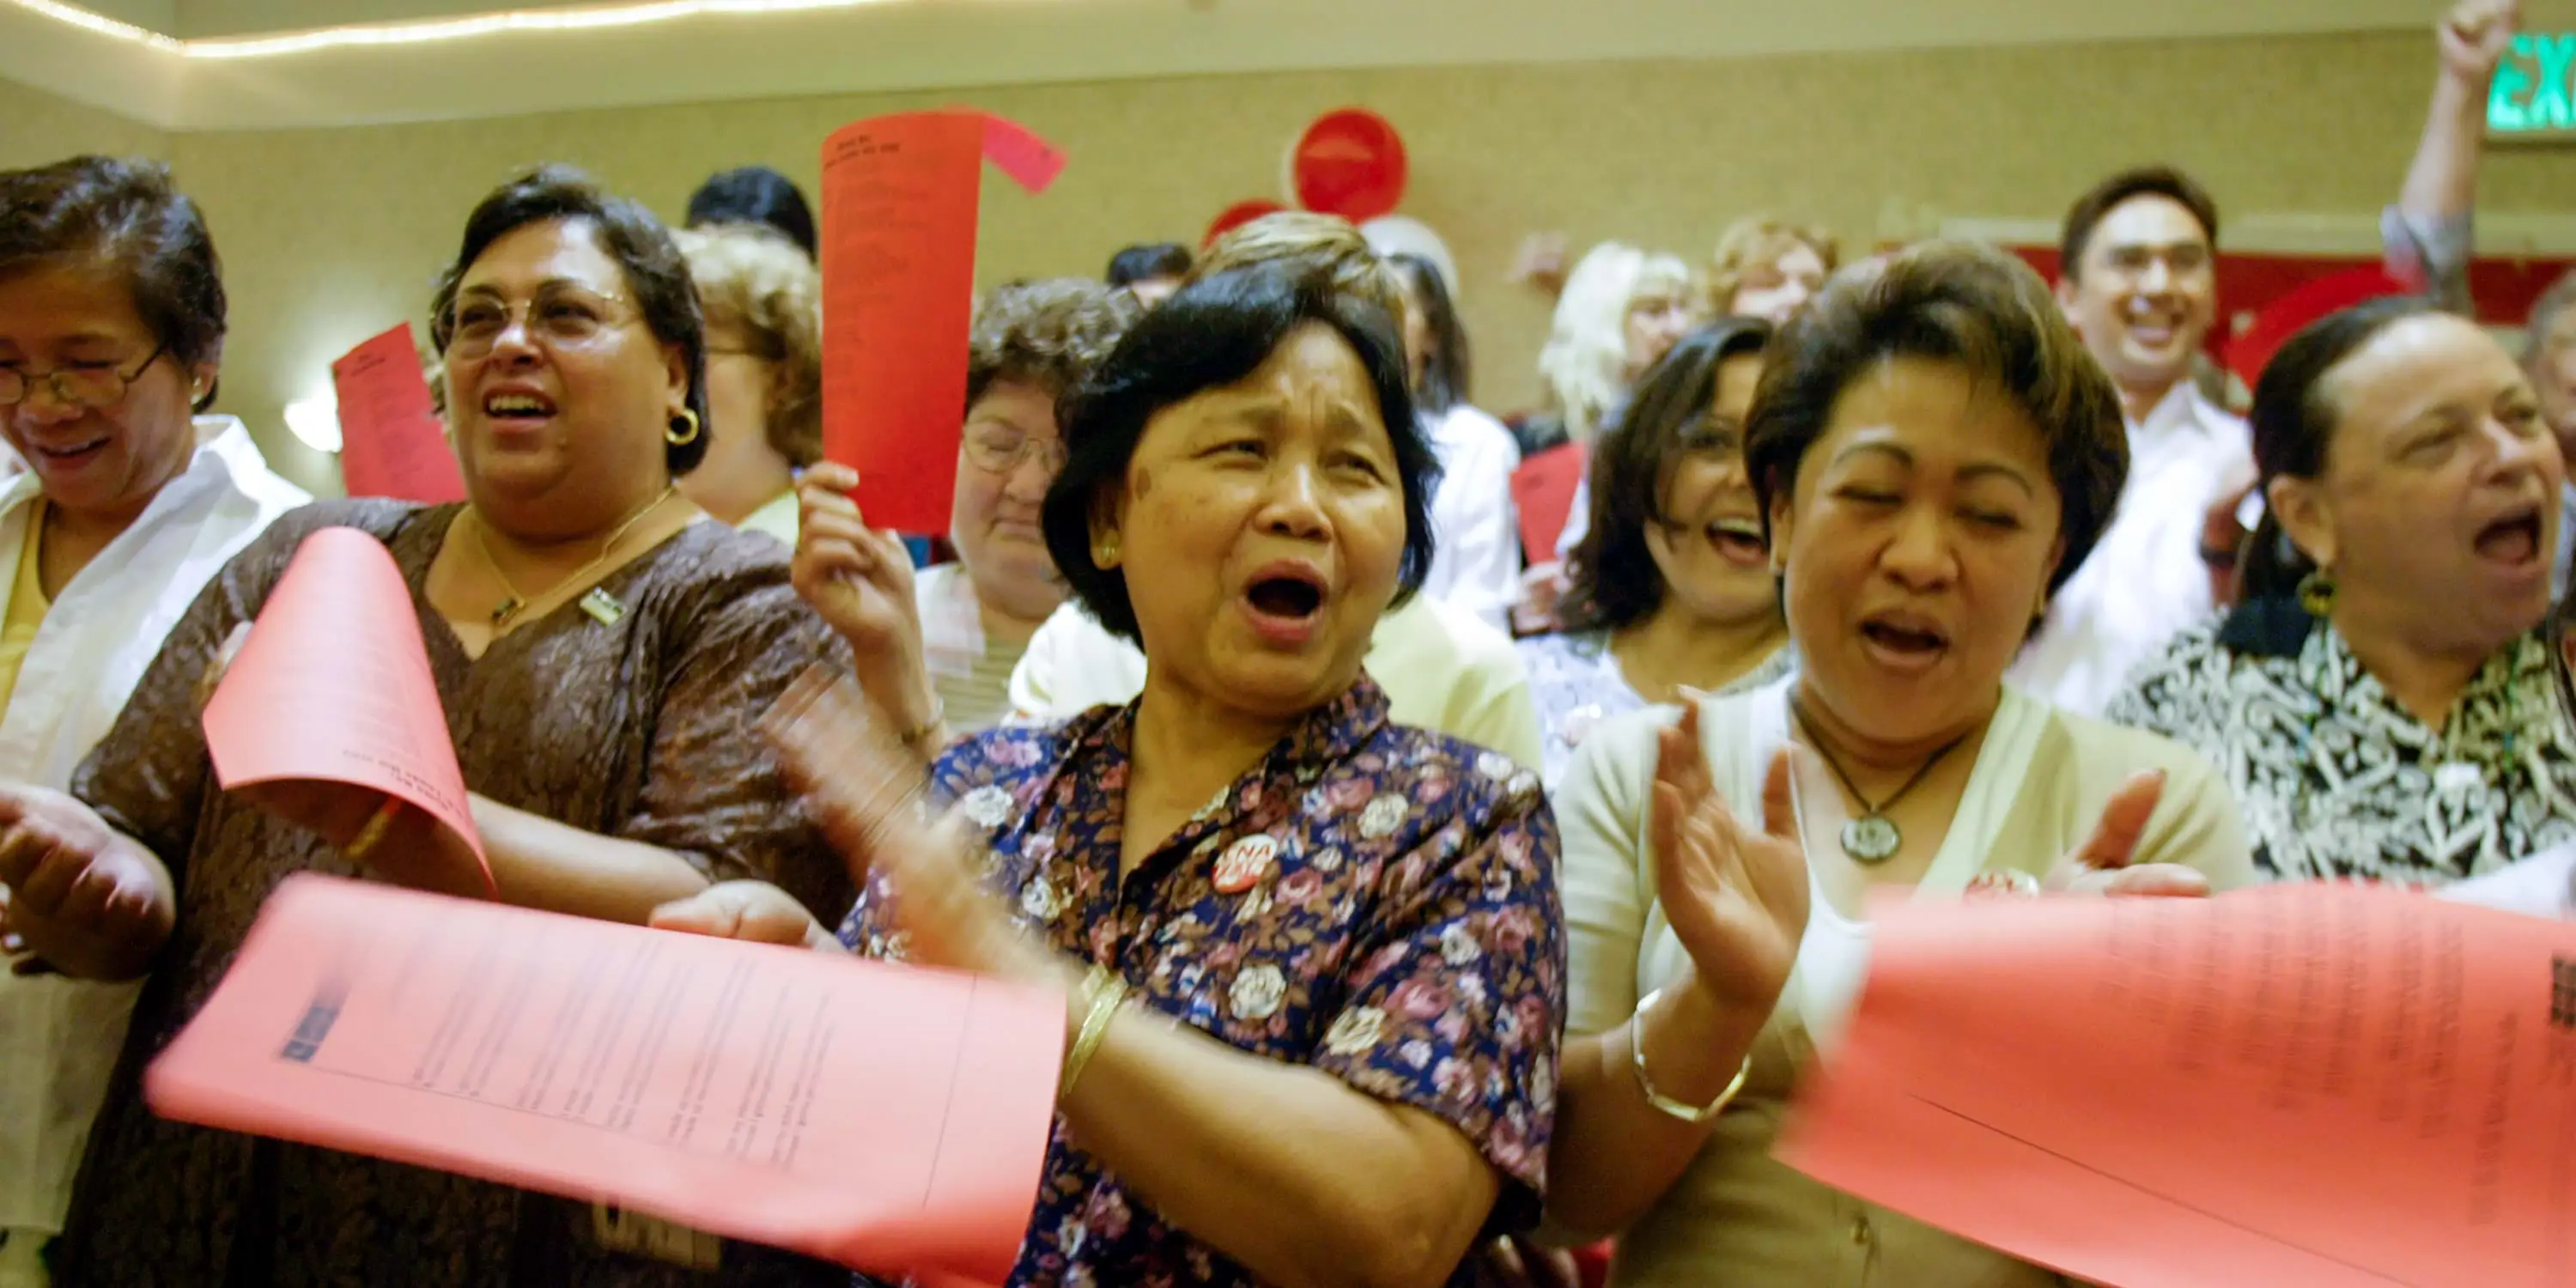 A row of Asian women carrying red pieces of paper cheer and applaud in a crowd.